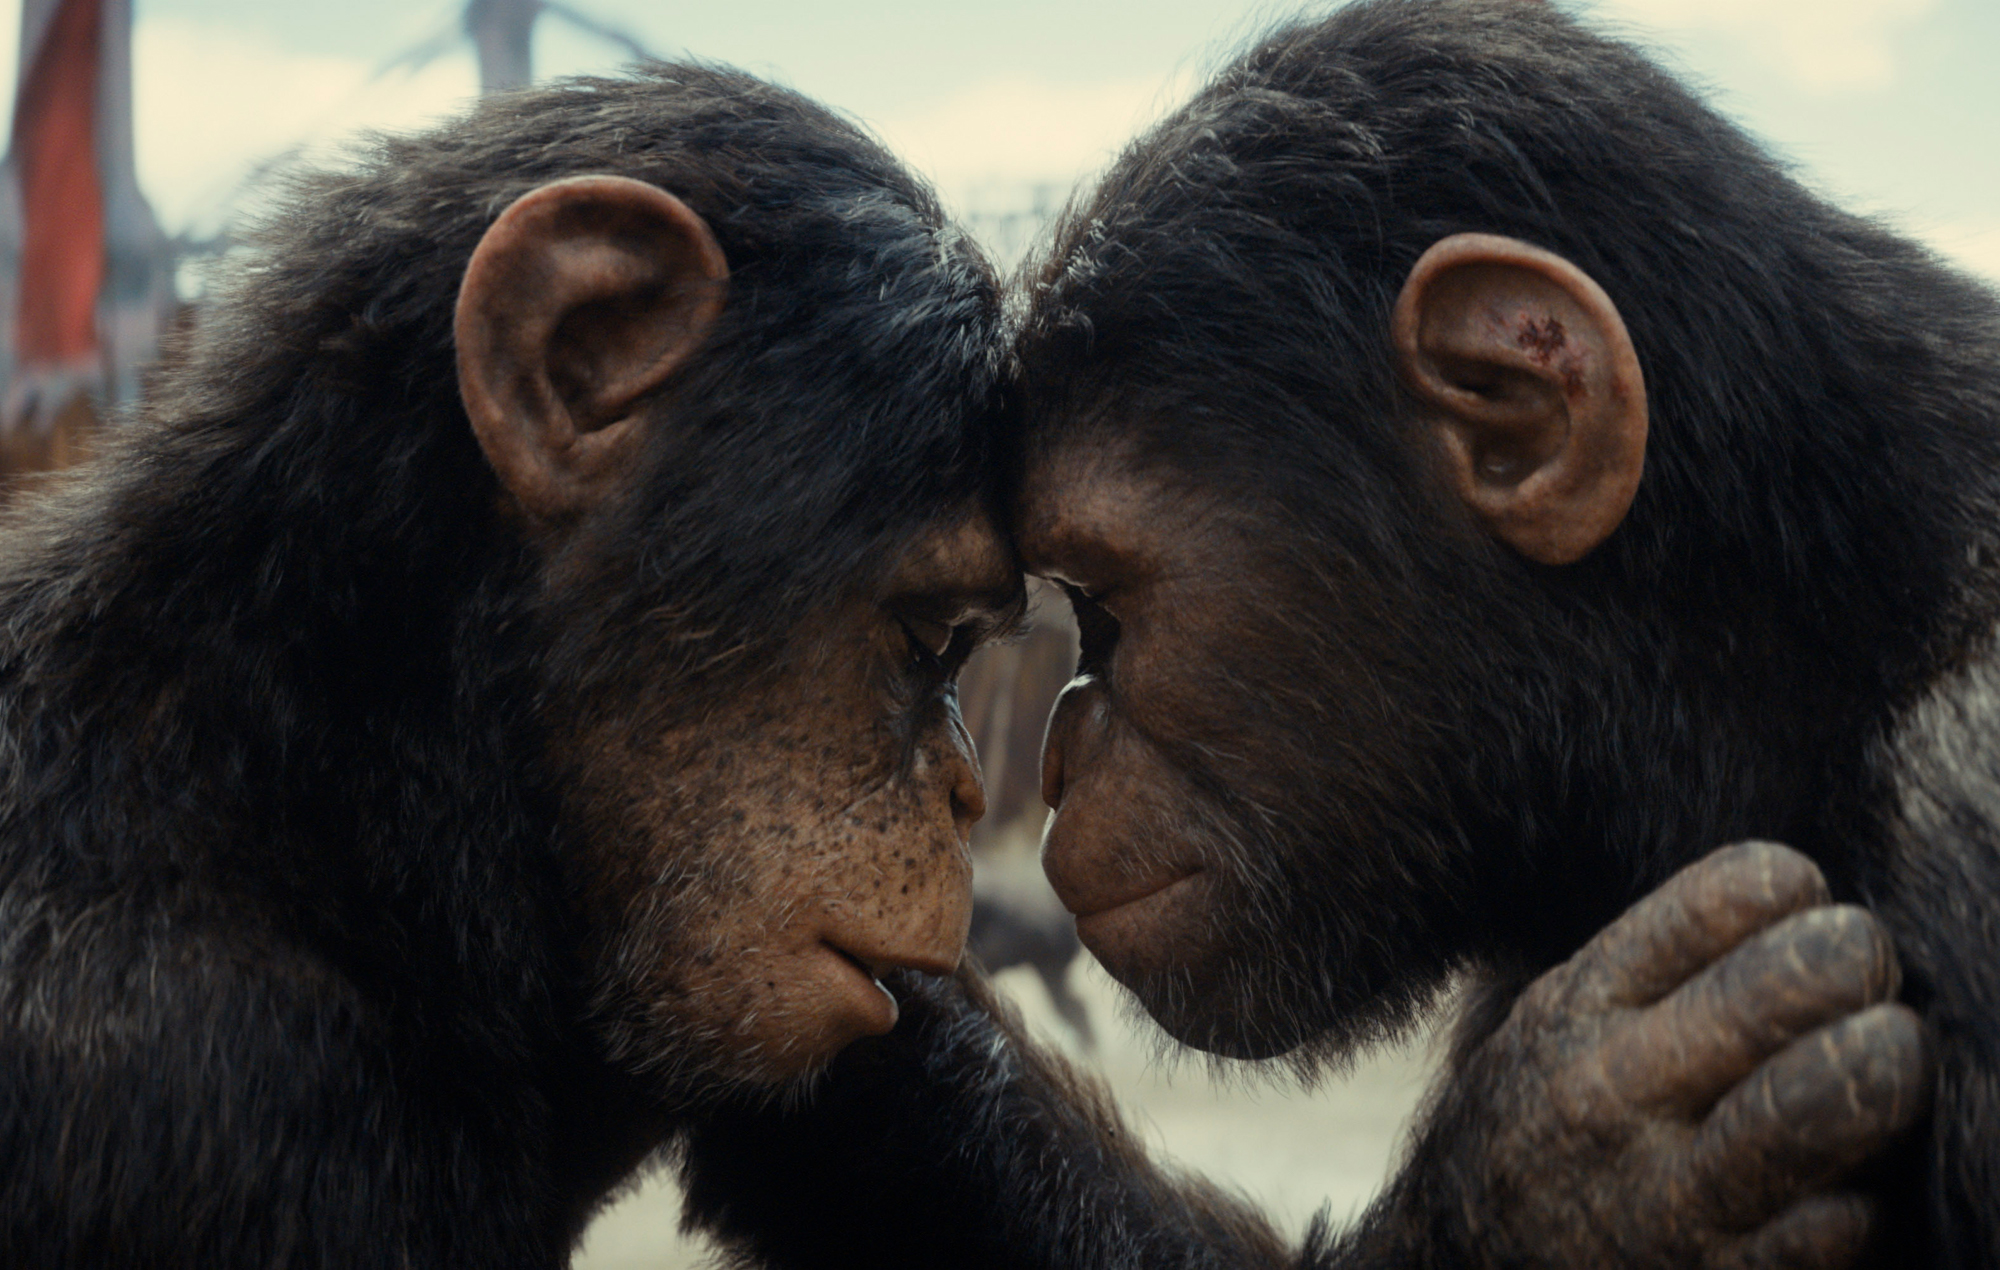 ‘Kingdom Of The Planet Of The Apes’ review: more maniacal monkeys in a middling sequel